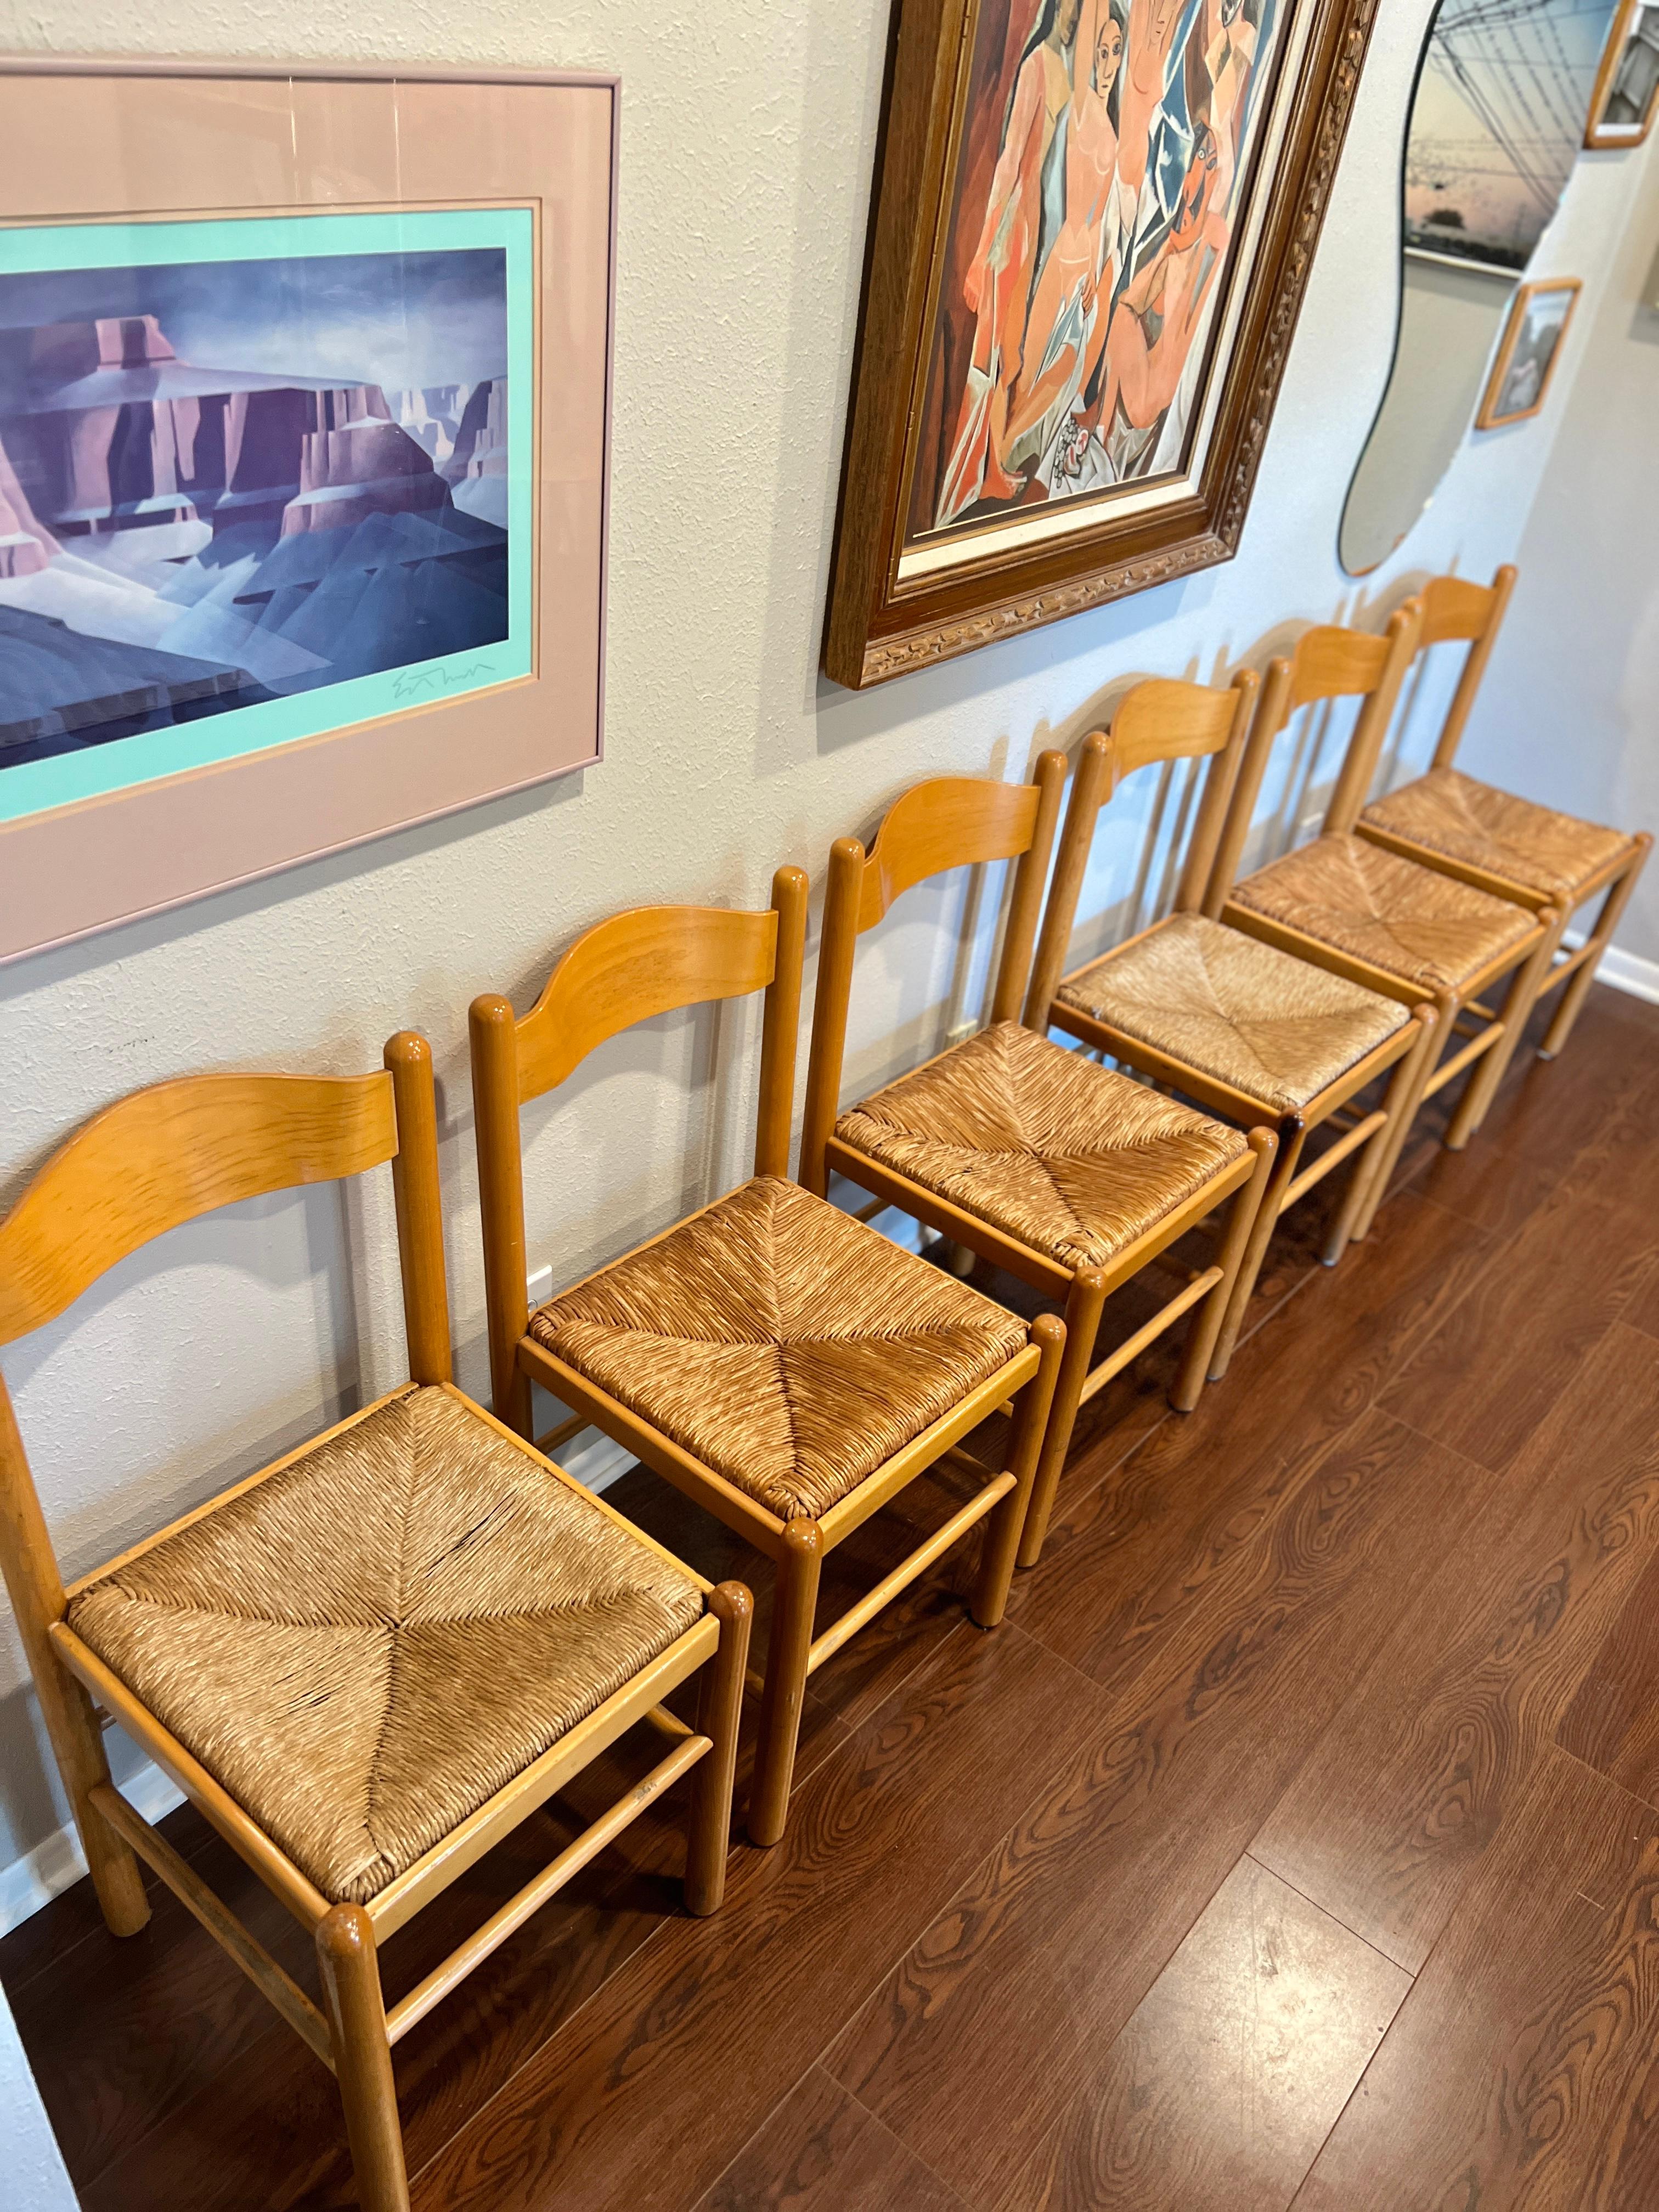 A set of 6 vintage chairs in rush and solid wood frames, circa 1970s. These chairs feature open backs with horizontal slat designs. They are meticulously handcrafted, showcasing a simple yet elegant style with a touch of modern organic aesthetics.